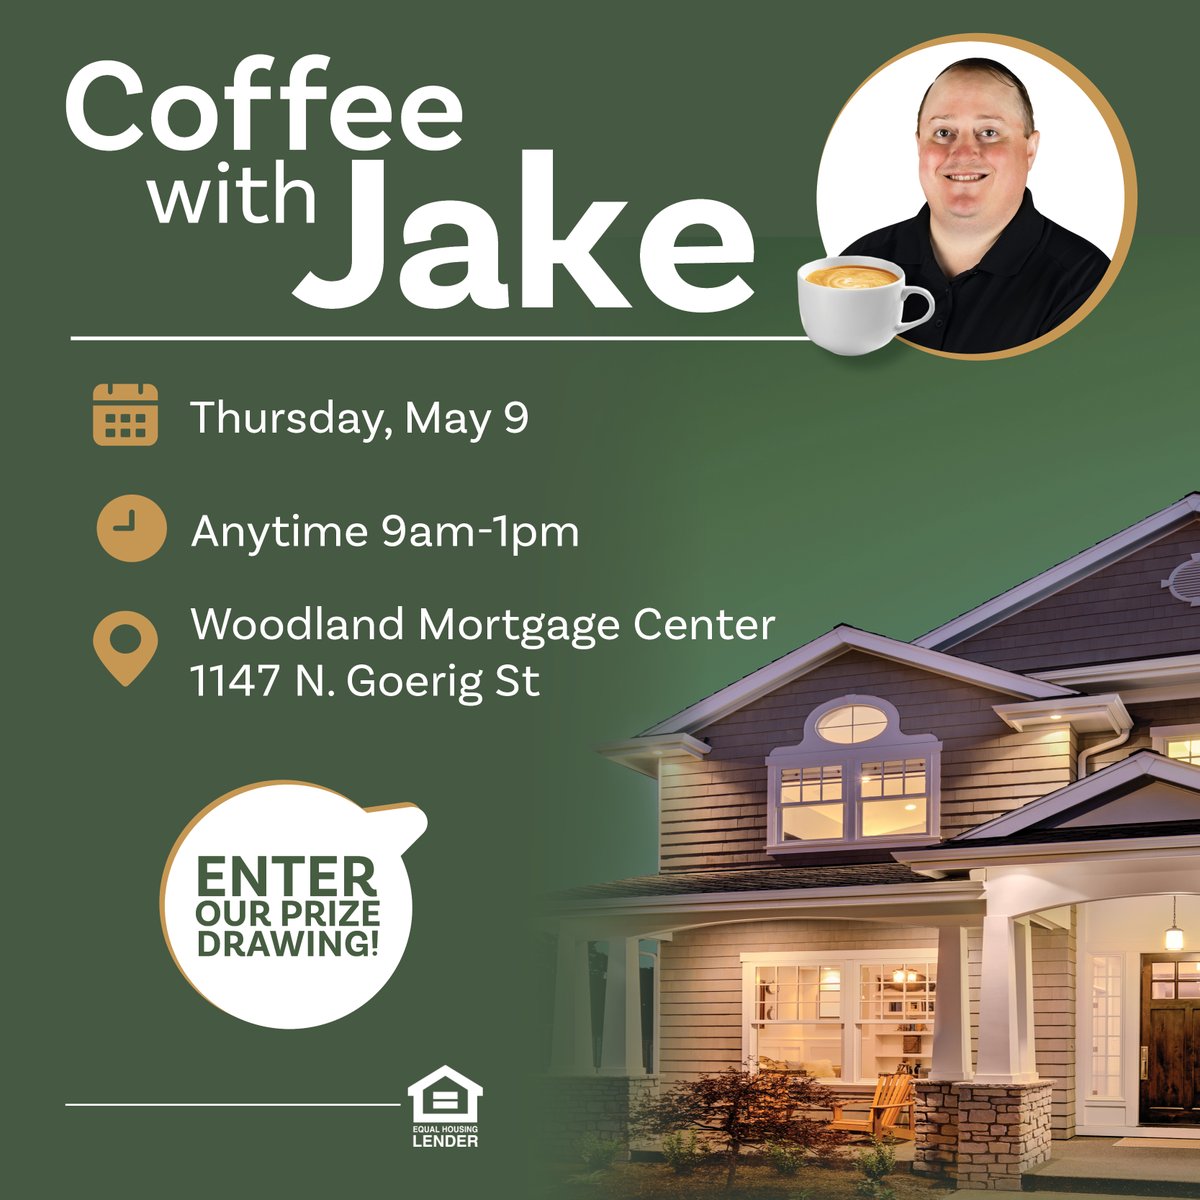 Join mortgage expert Jake for an informal chat about the mortgage process. Stop by anytime 9am-1pm this Thursday, May 9 to enjoy Luckman Coffee Company muffins and coffee and ask any mortgage-related questions you have. See you there! 🏠☕#CoffeewithJake